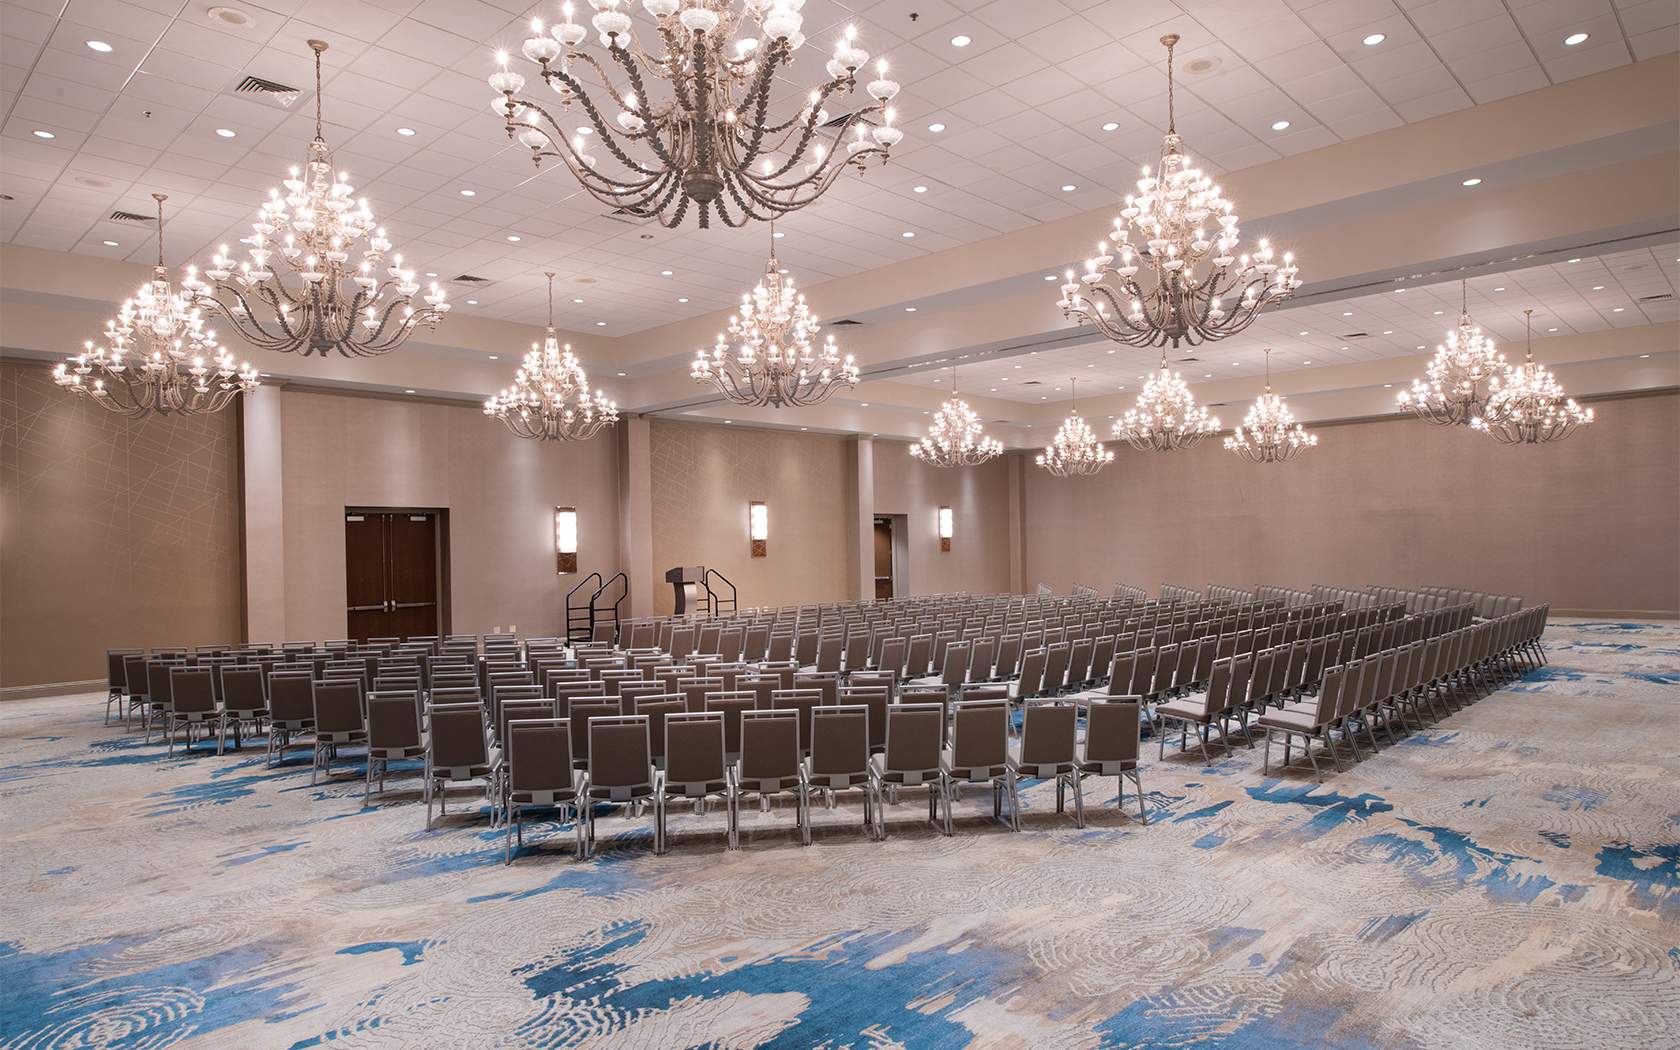 large meeting room with rows of chairs